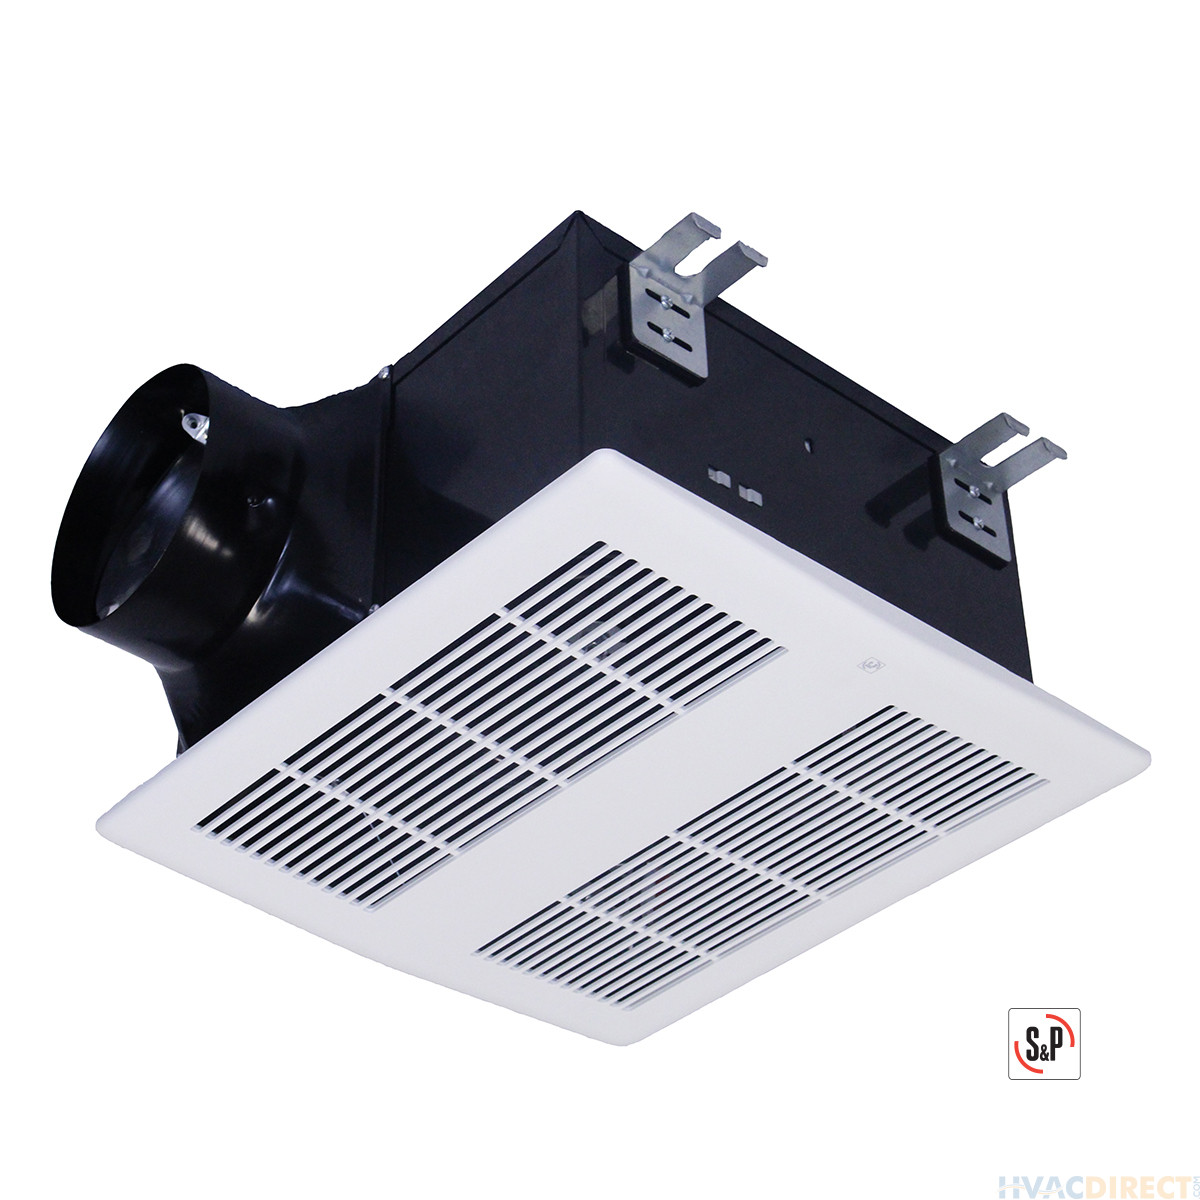 S&P Premium Choice Ceiling Mounted Bathroom Exhaust Fan With High Volume DC Motor - PCD200